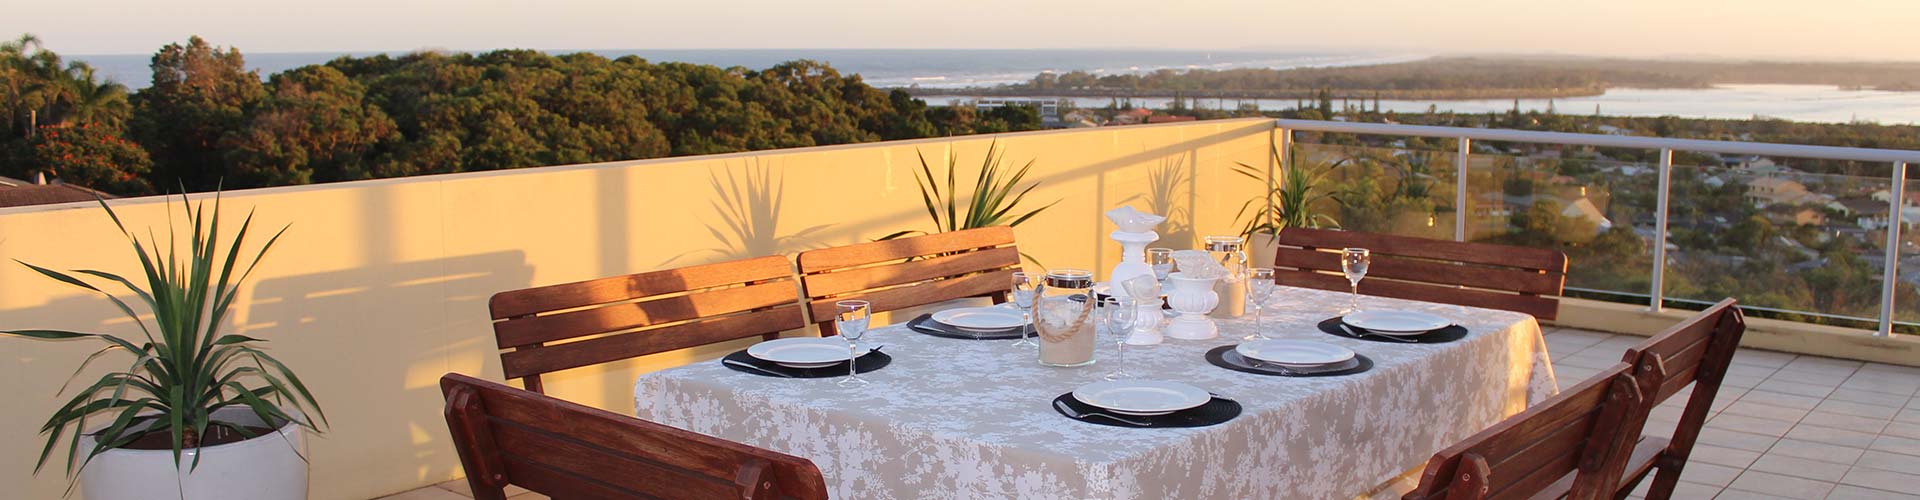 Grandview Apartments Ballina - Coogee Beach Accommodation 4